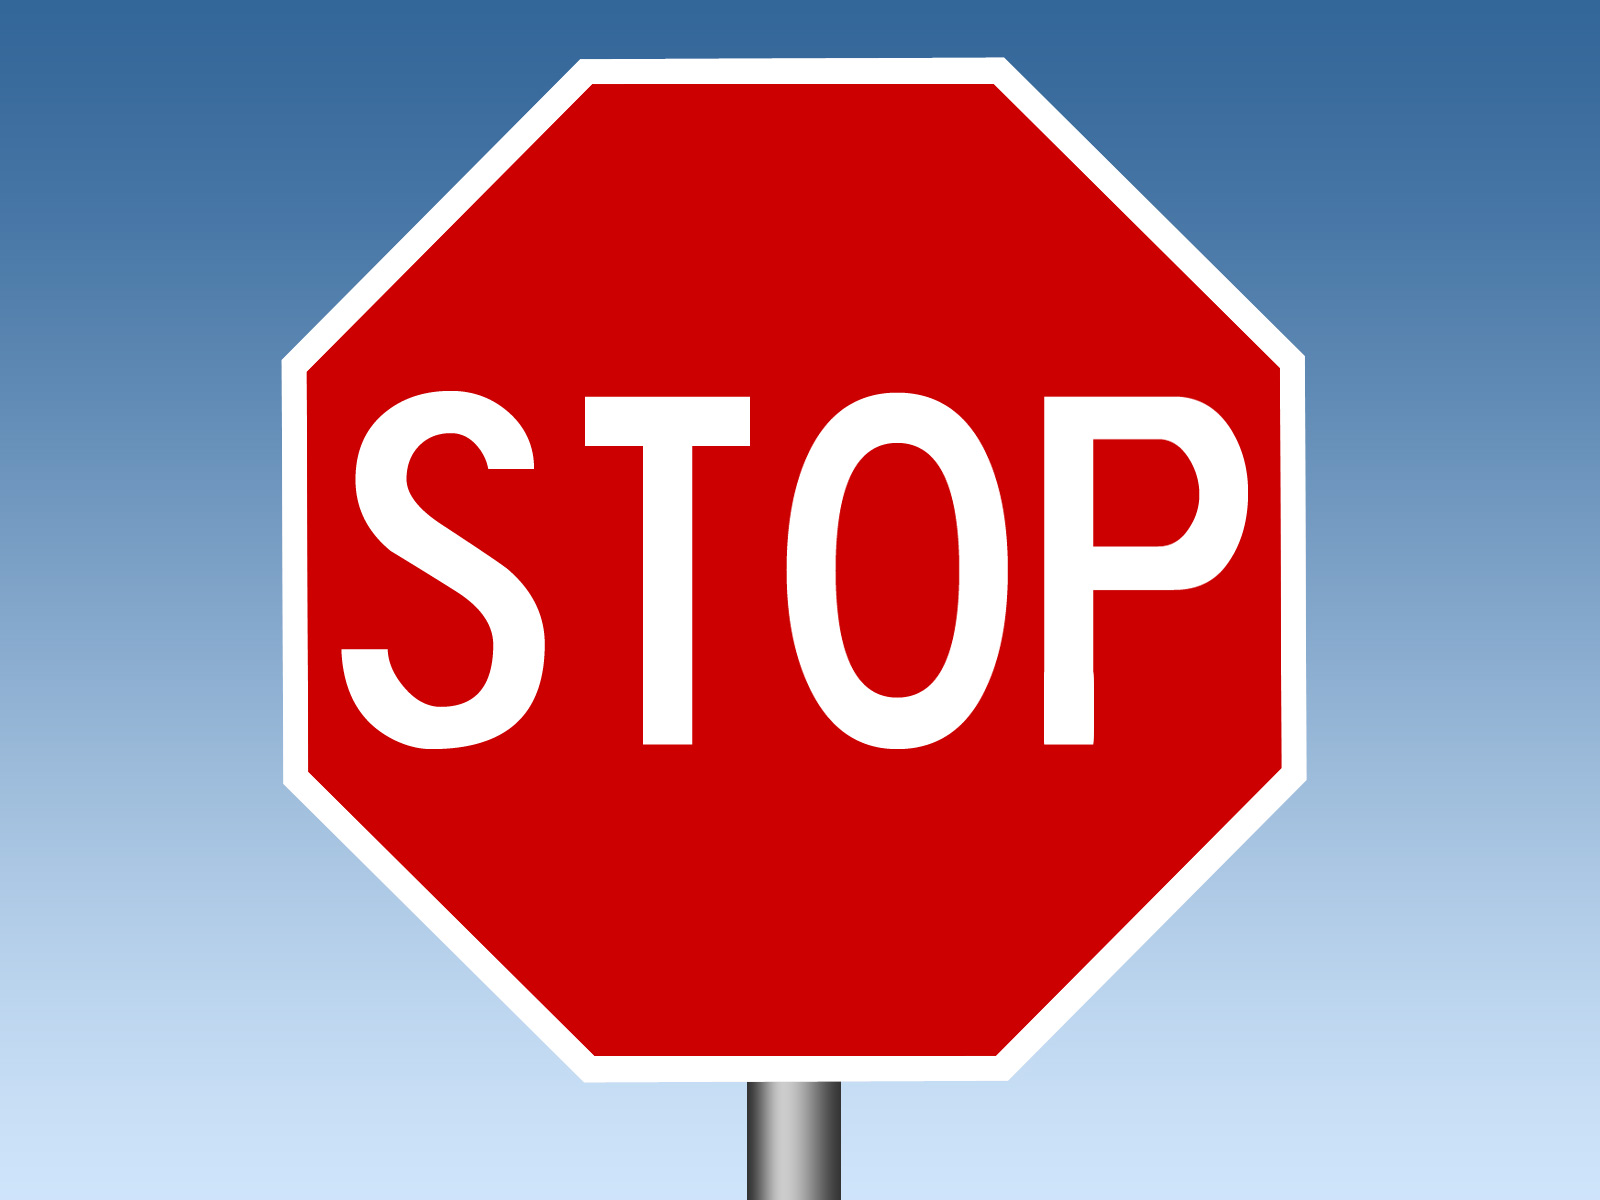 Traffic stop sign